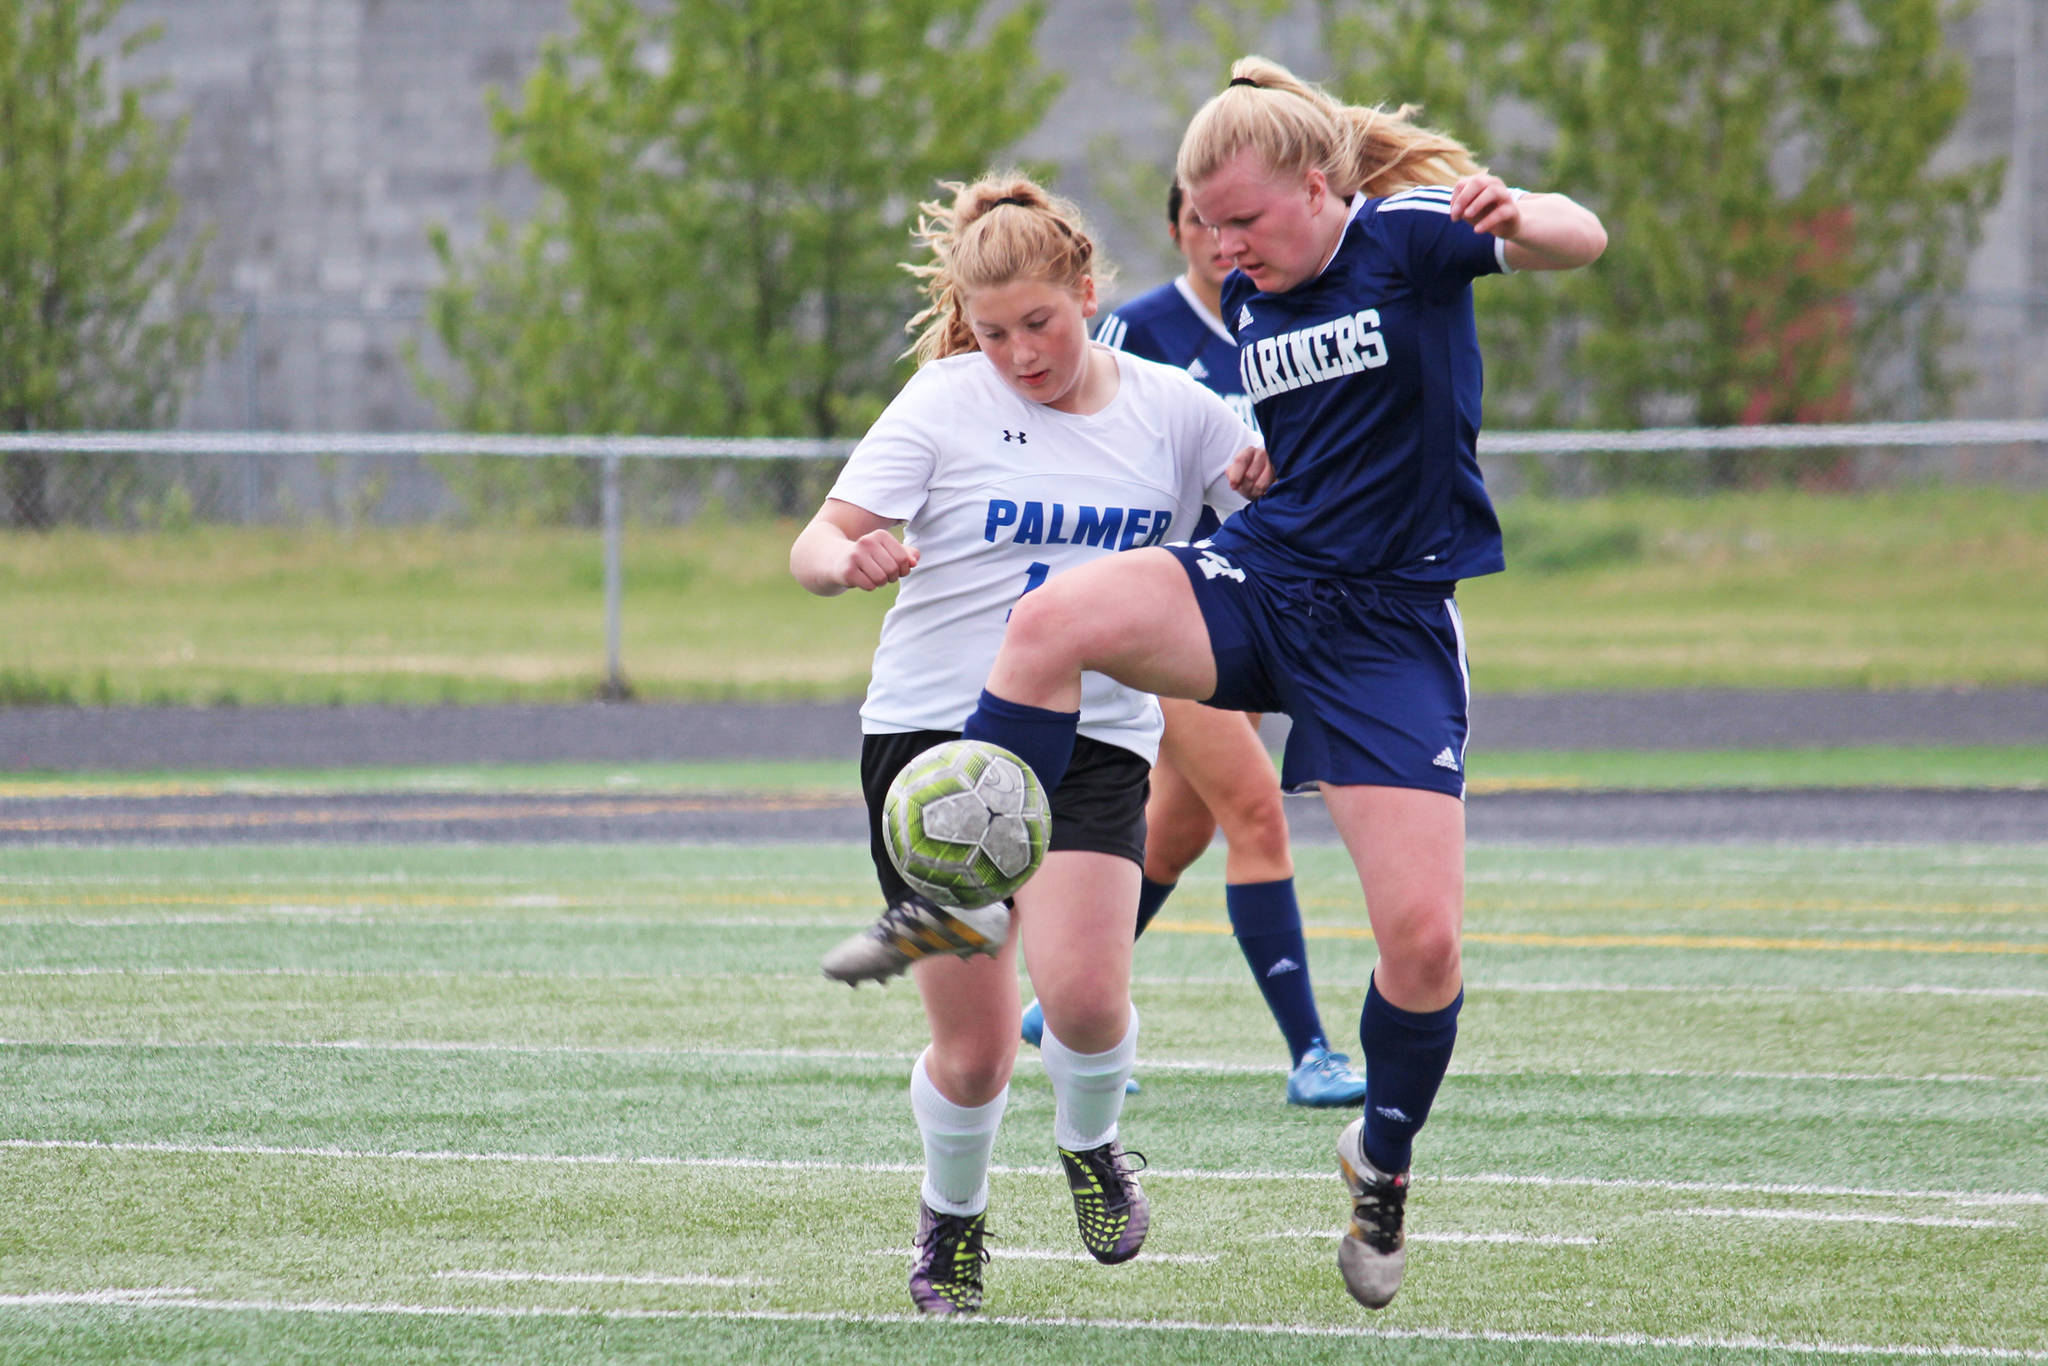 Homer’s Daisy Kettle battles for the ball with Palmer’s Avery Hill in a Friday, May 24, 2019 game during the Division II state soccer championship tournament at West Anchorage High School in Anchorage, Alaska. (Photo by Megan Pacer/Homer News)